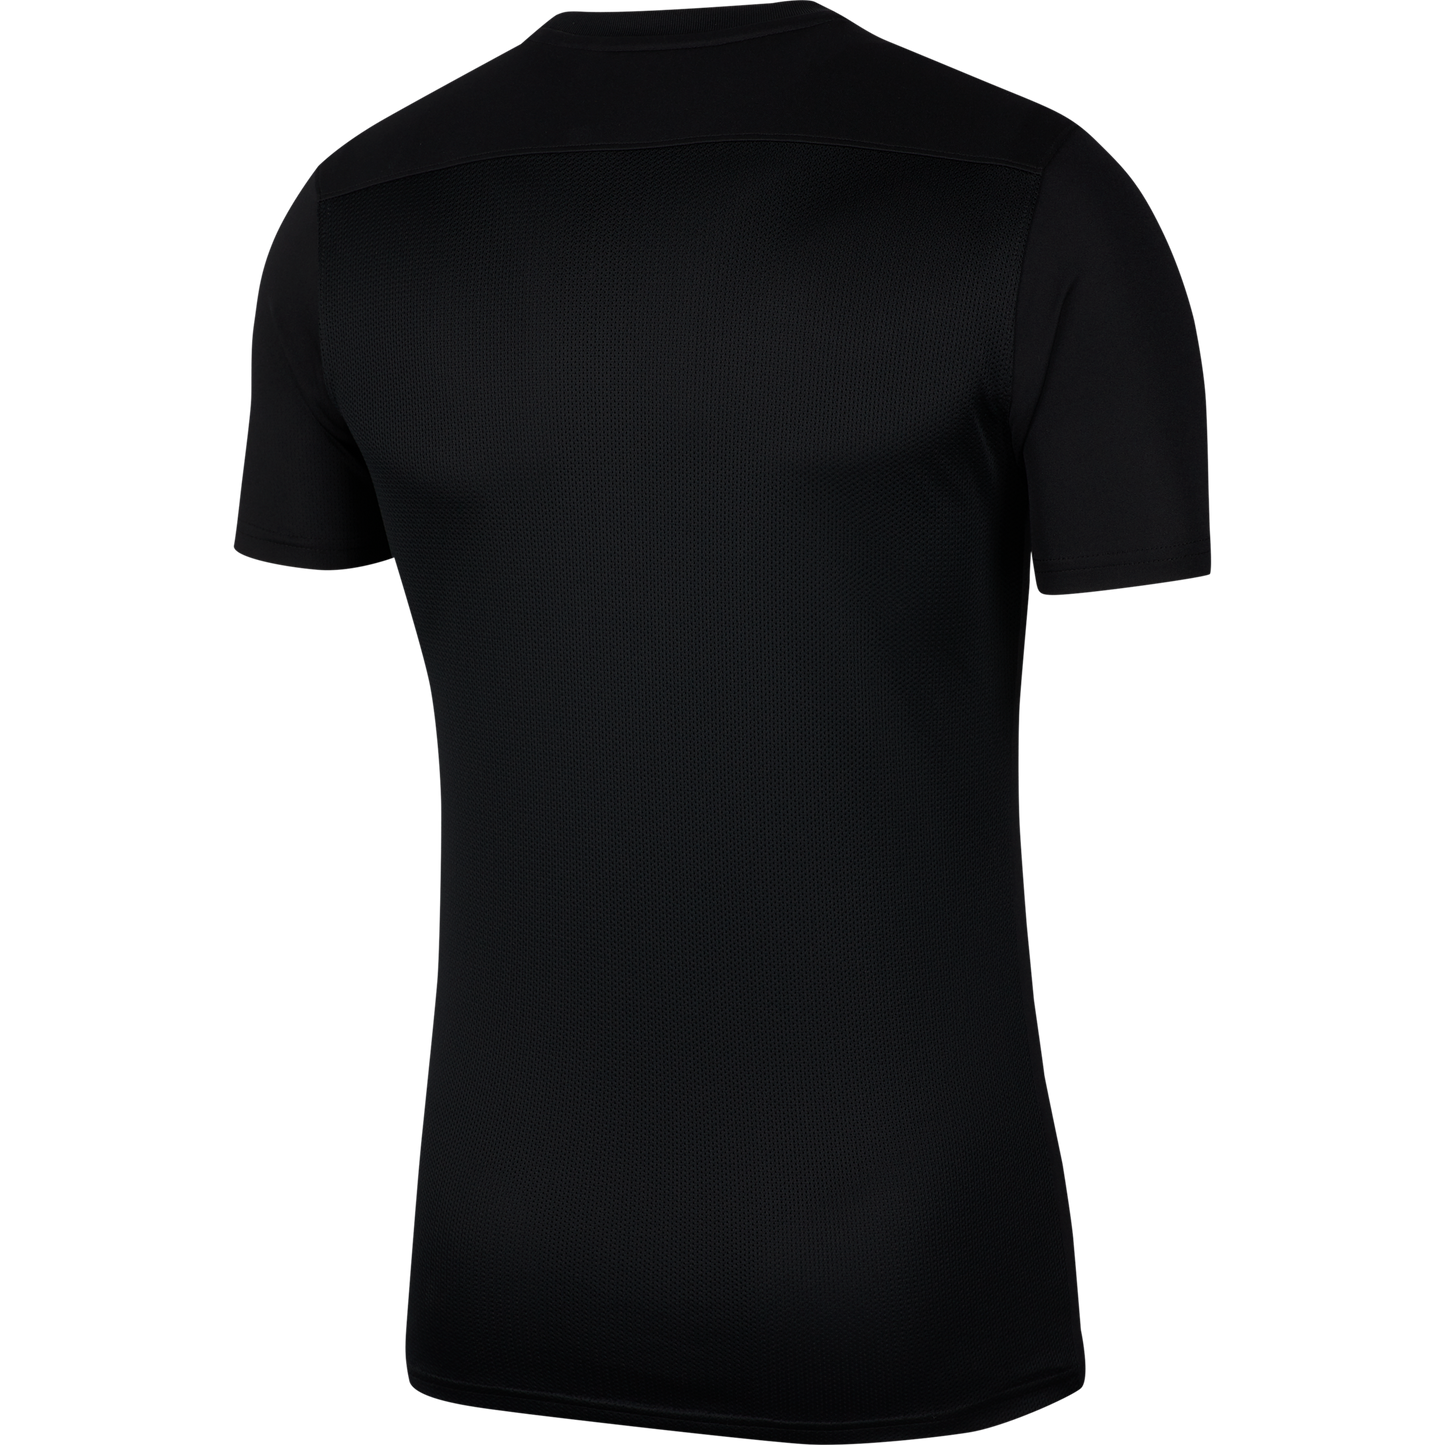 SOUTHERN DRAGONS NIKE PARK VII BLACK JERSEY - YOUTH'S